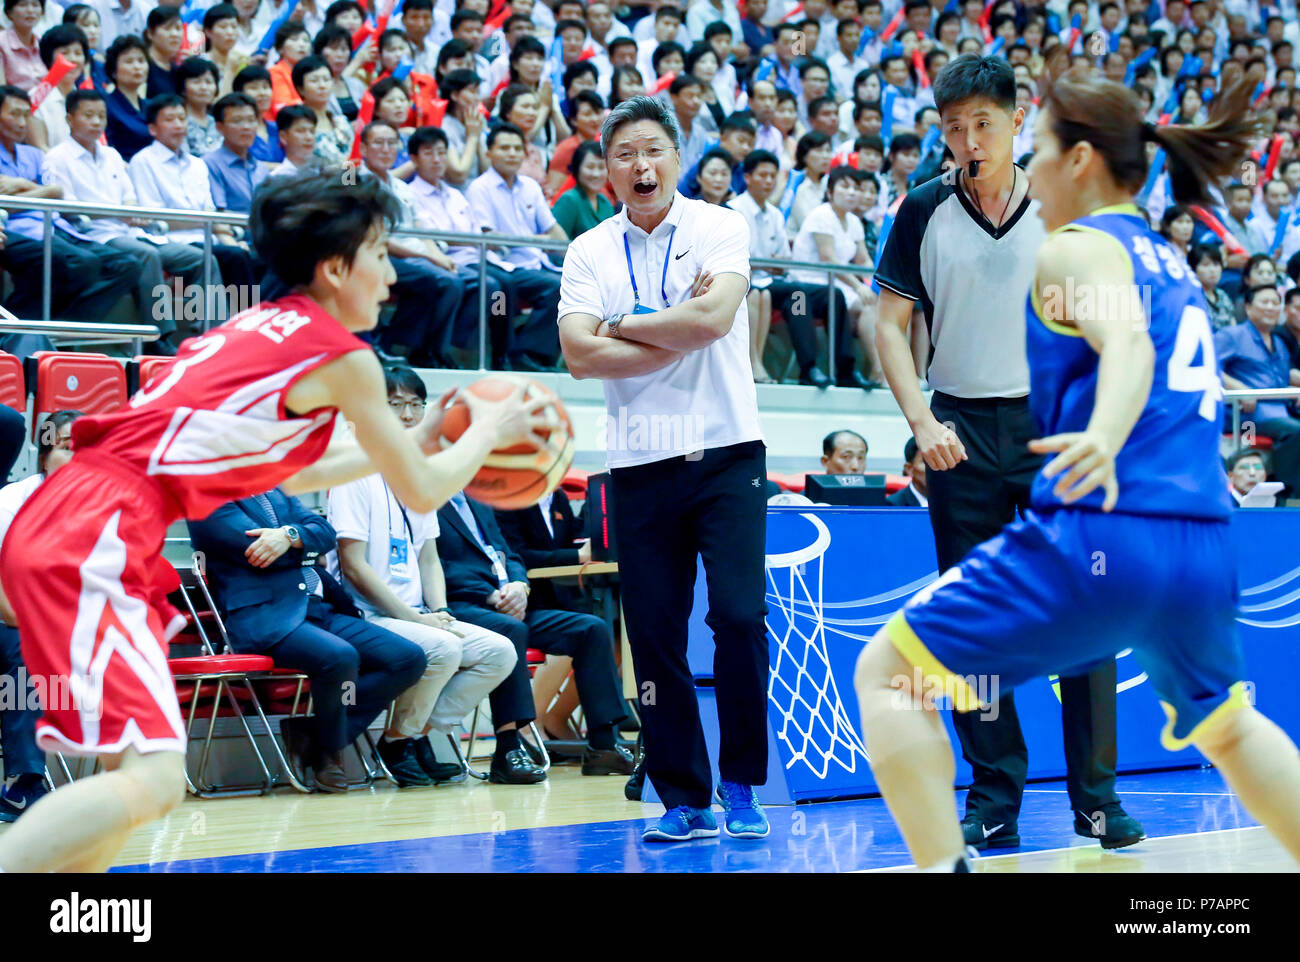 Inter-Korean friendly basketball match, July 5, 2018 : South Korea's coach Lee Mun-kyu (C) during inter-Korean women's friendly basketball match at Ryugyong Chung Ju-yung Gymnasium in Pyongyang, North Korea. The 100-strong South Korean delegation of athletes, coaches, government officials and journalists arrived in Pyongyang on July 3 for the matches which have not been held in 15 years. Credit: Press Pool in Pyeongyang/AFLO/Alamy Live News Stock Photo